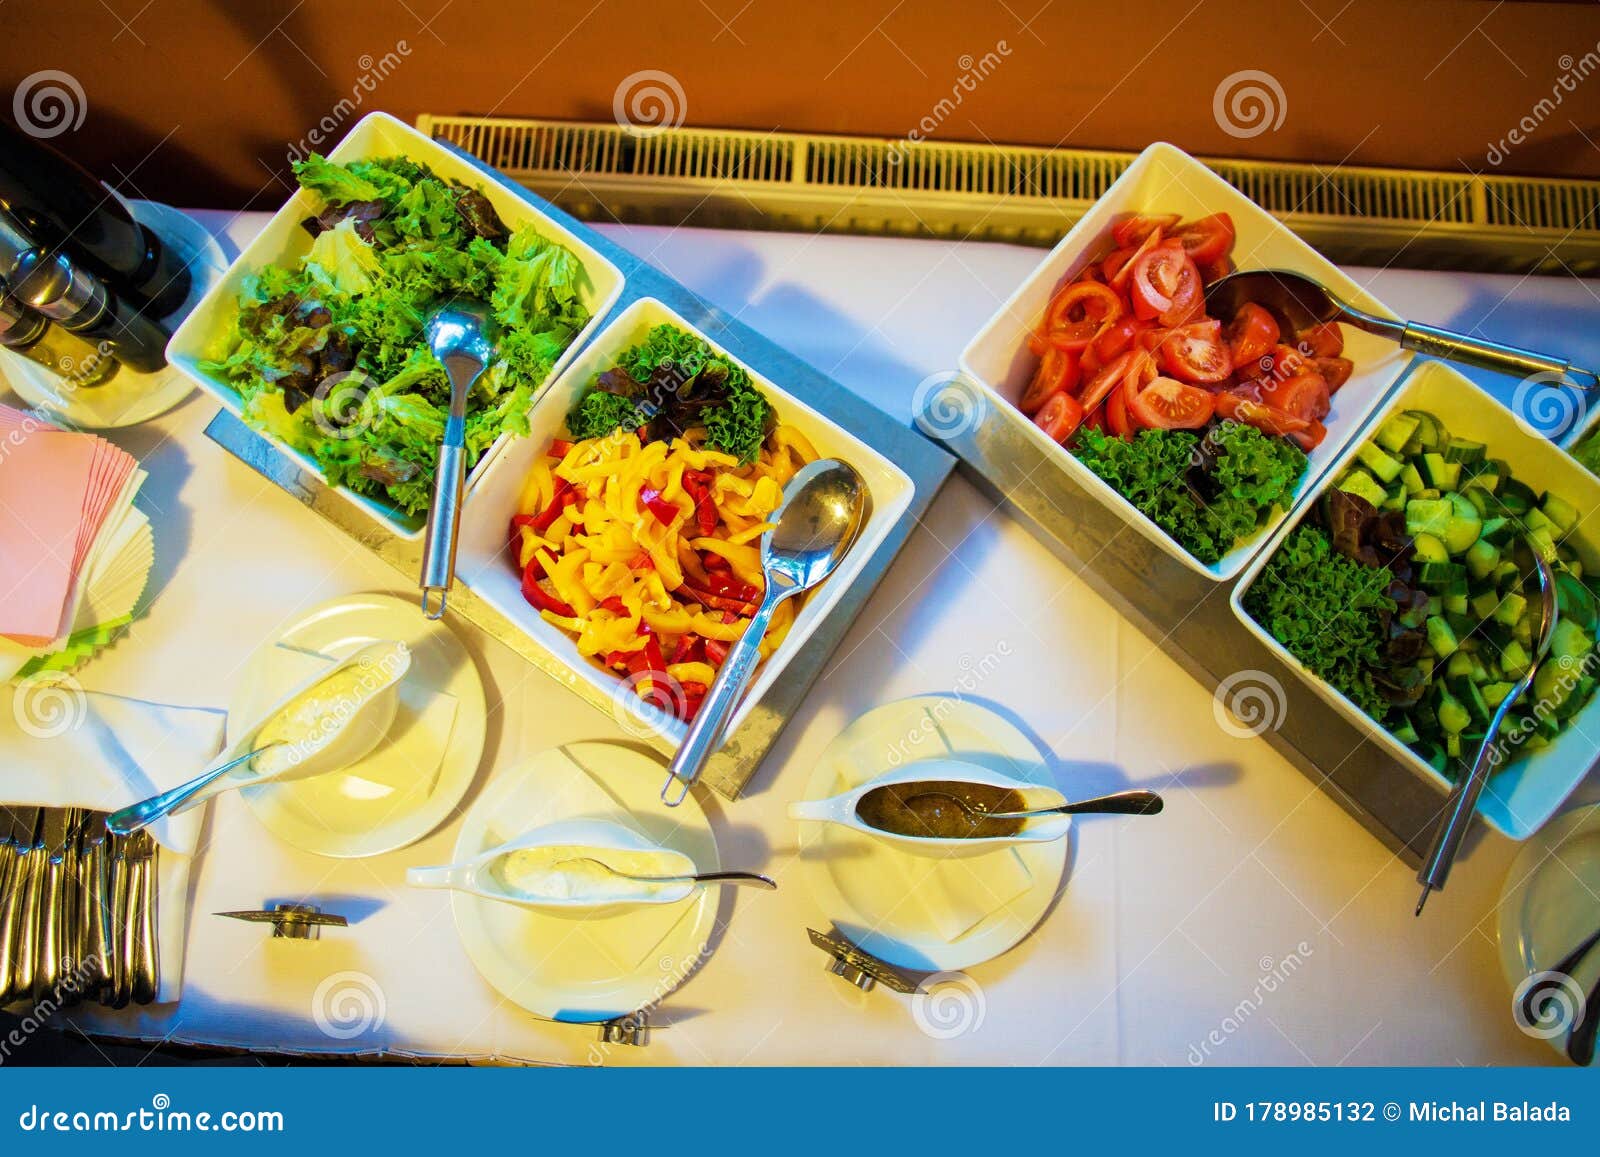 food and drink at the restaurant. table setting. tasting dishes. set of cold snacks, canape, beverages, closeup  parte meals